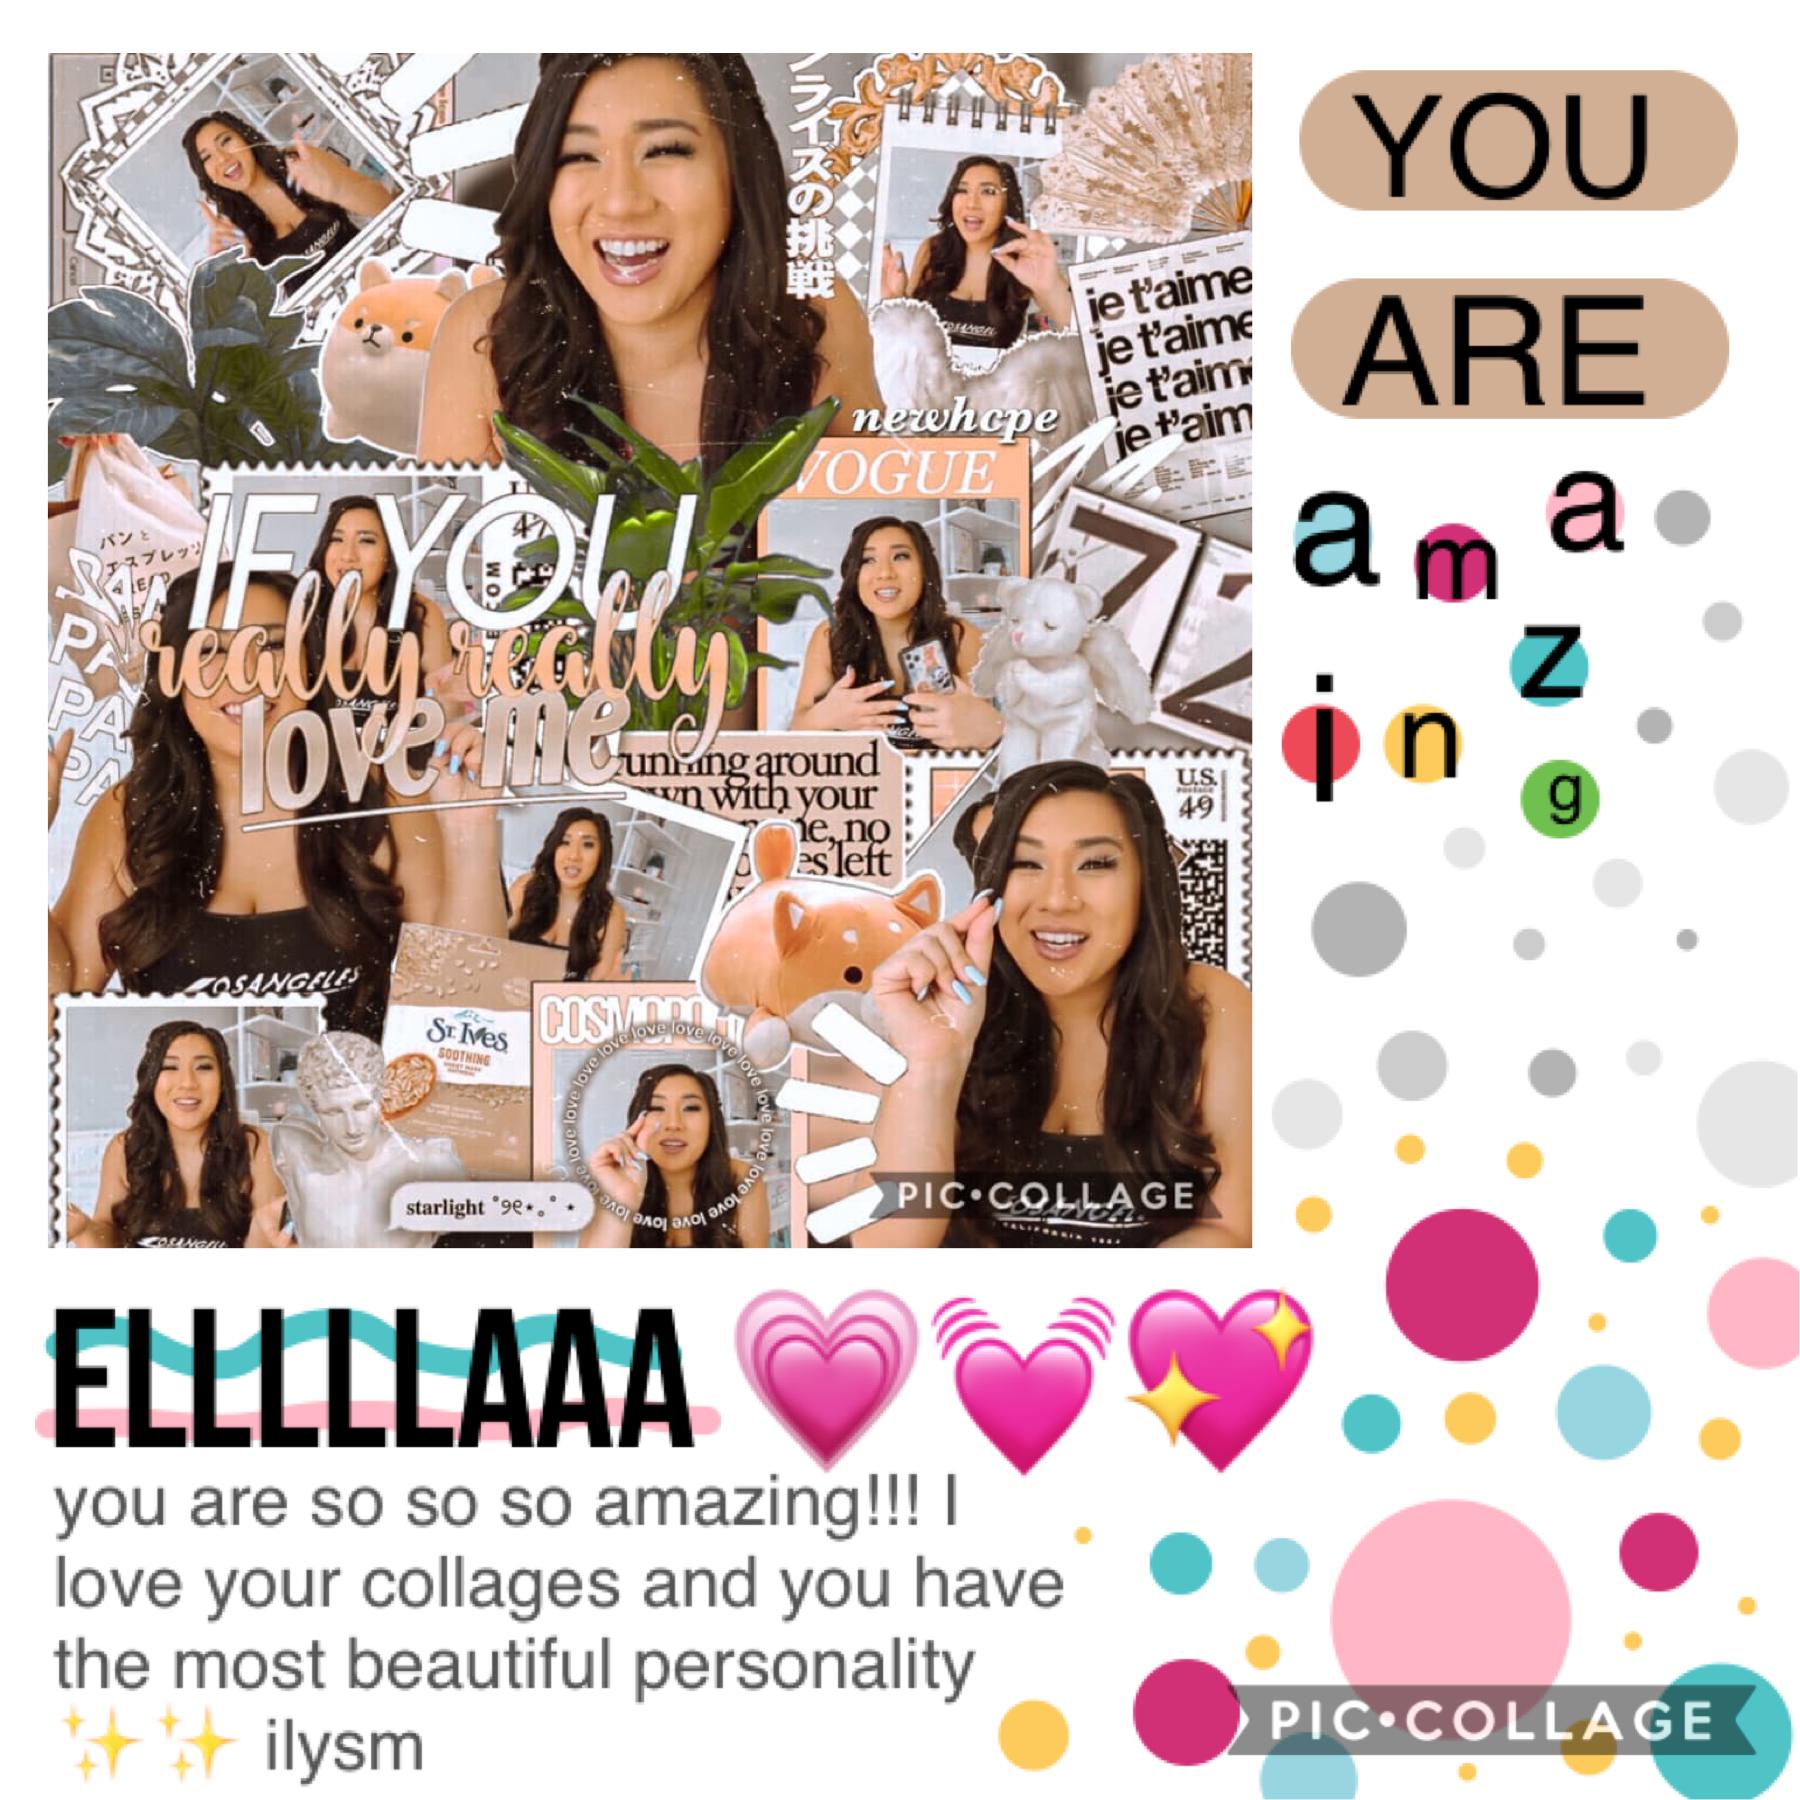 LOOK AT THIS BEAUTY 💖💗 ella is AMAZING and she makes the best collage s —- sincerely, the second owner of this account :)